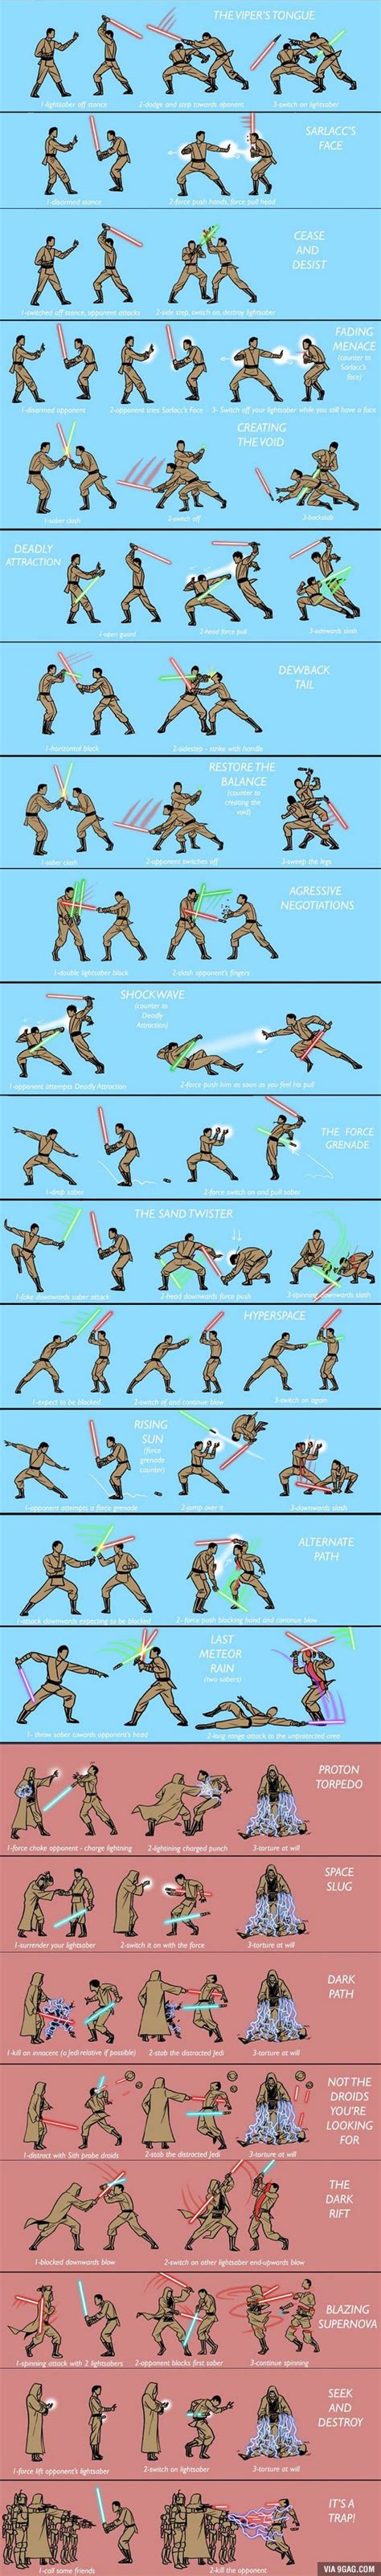 Alternate Lightsaber Techniques 9gag Funny Pictures And Best Jokes